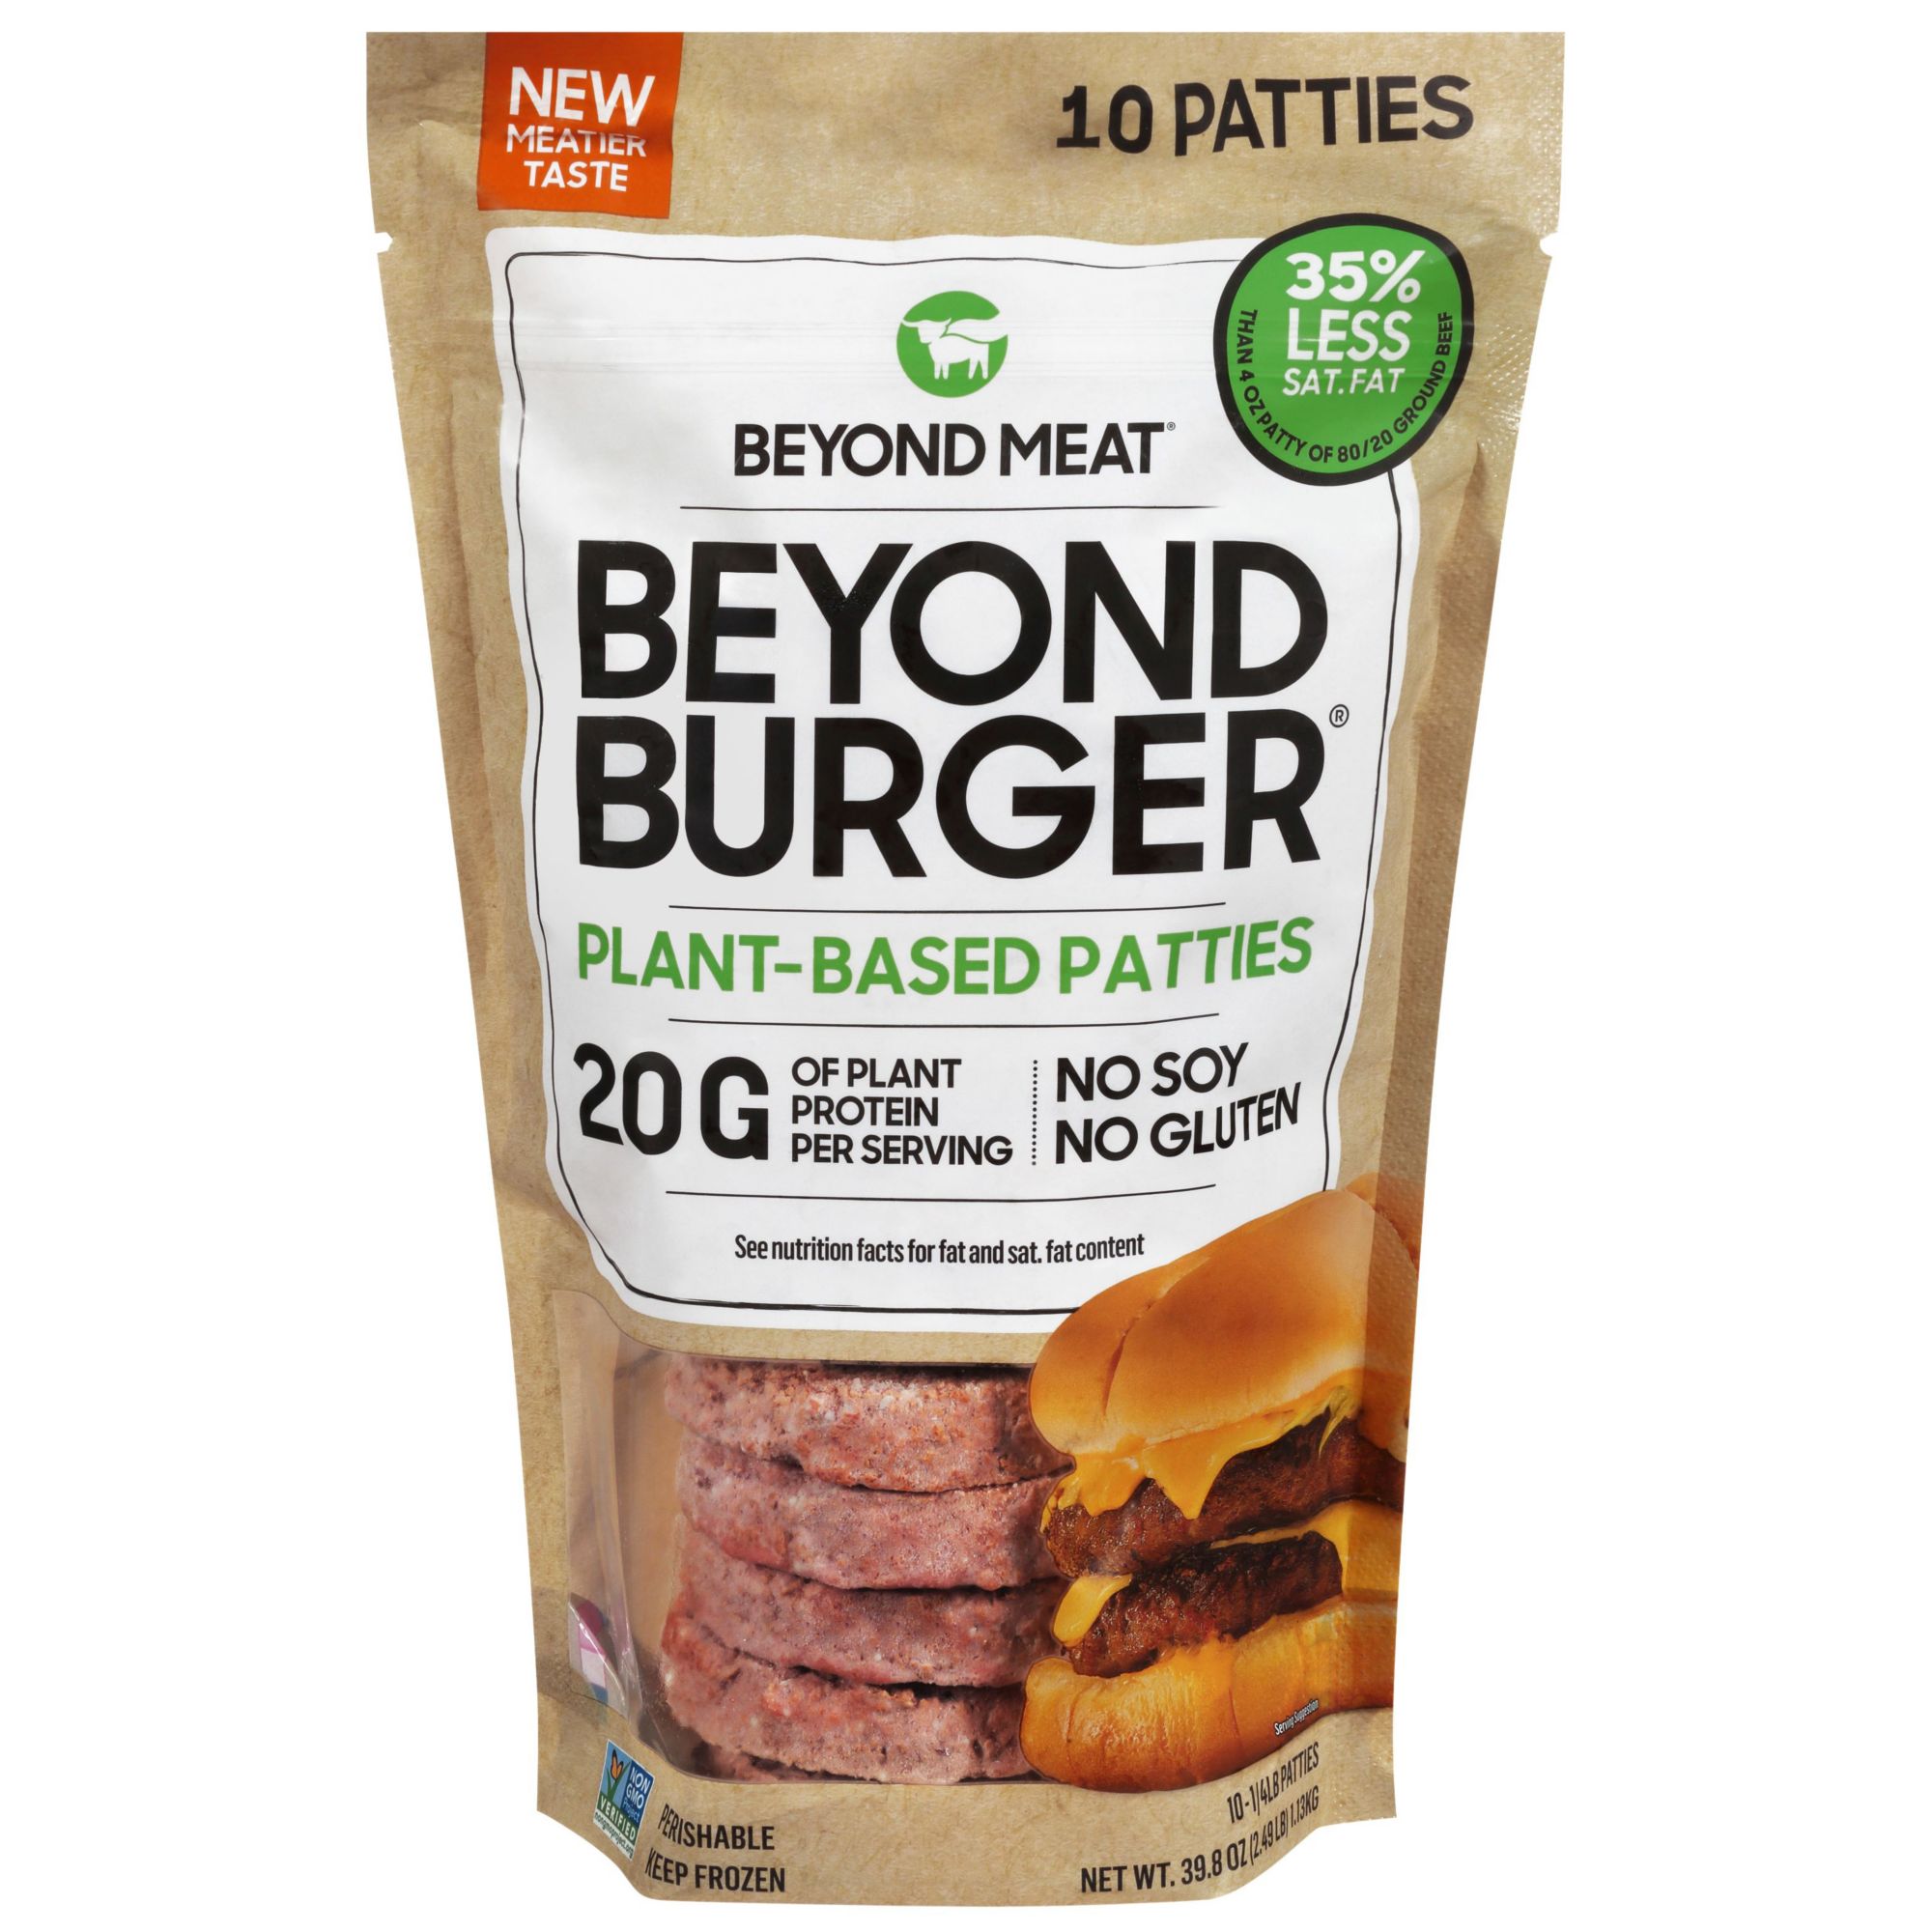 Beyond Meat Introduces New Beyond Burger and 10-Packs Exclusively at Costco  - vegconomist - the vegan business magazine